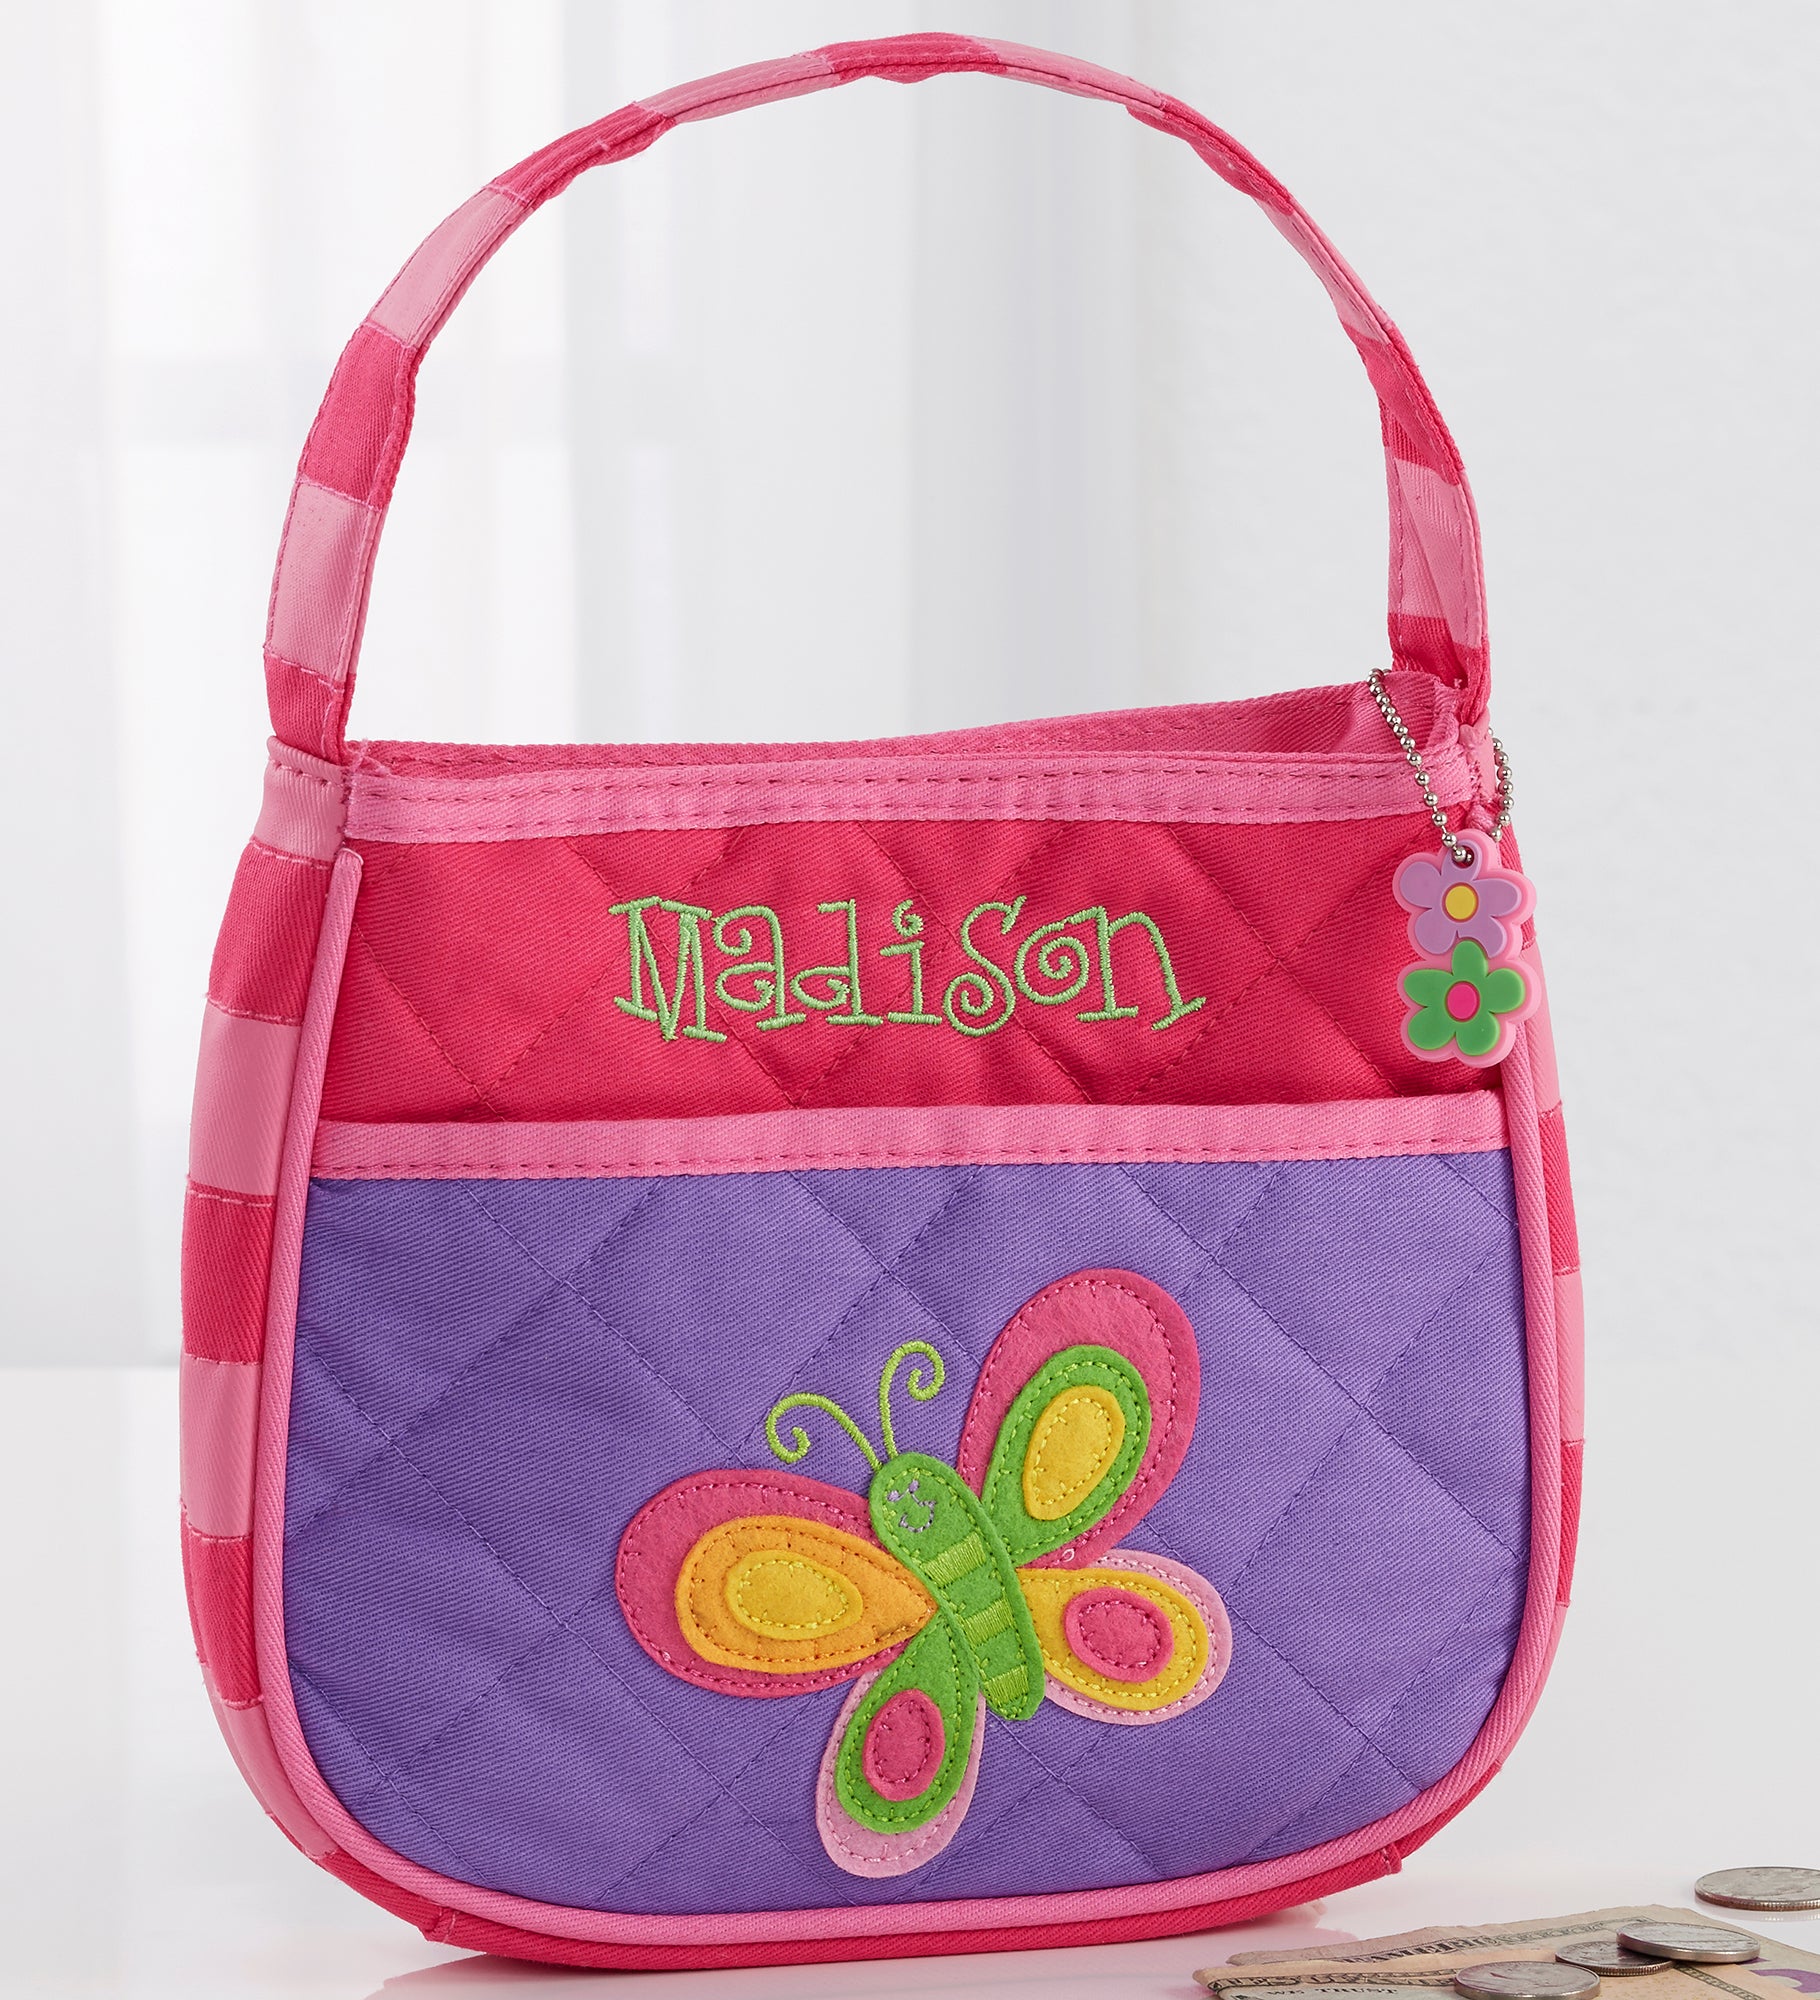 Butterfly Embroidered Purse by Stephen Joseph